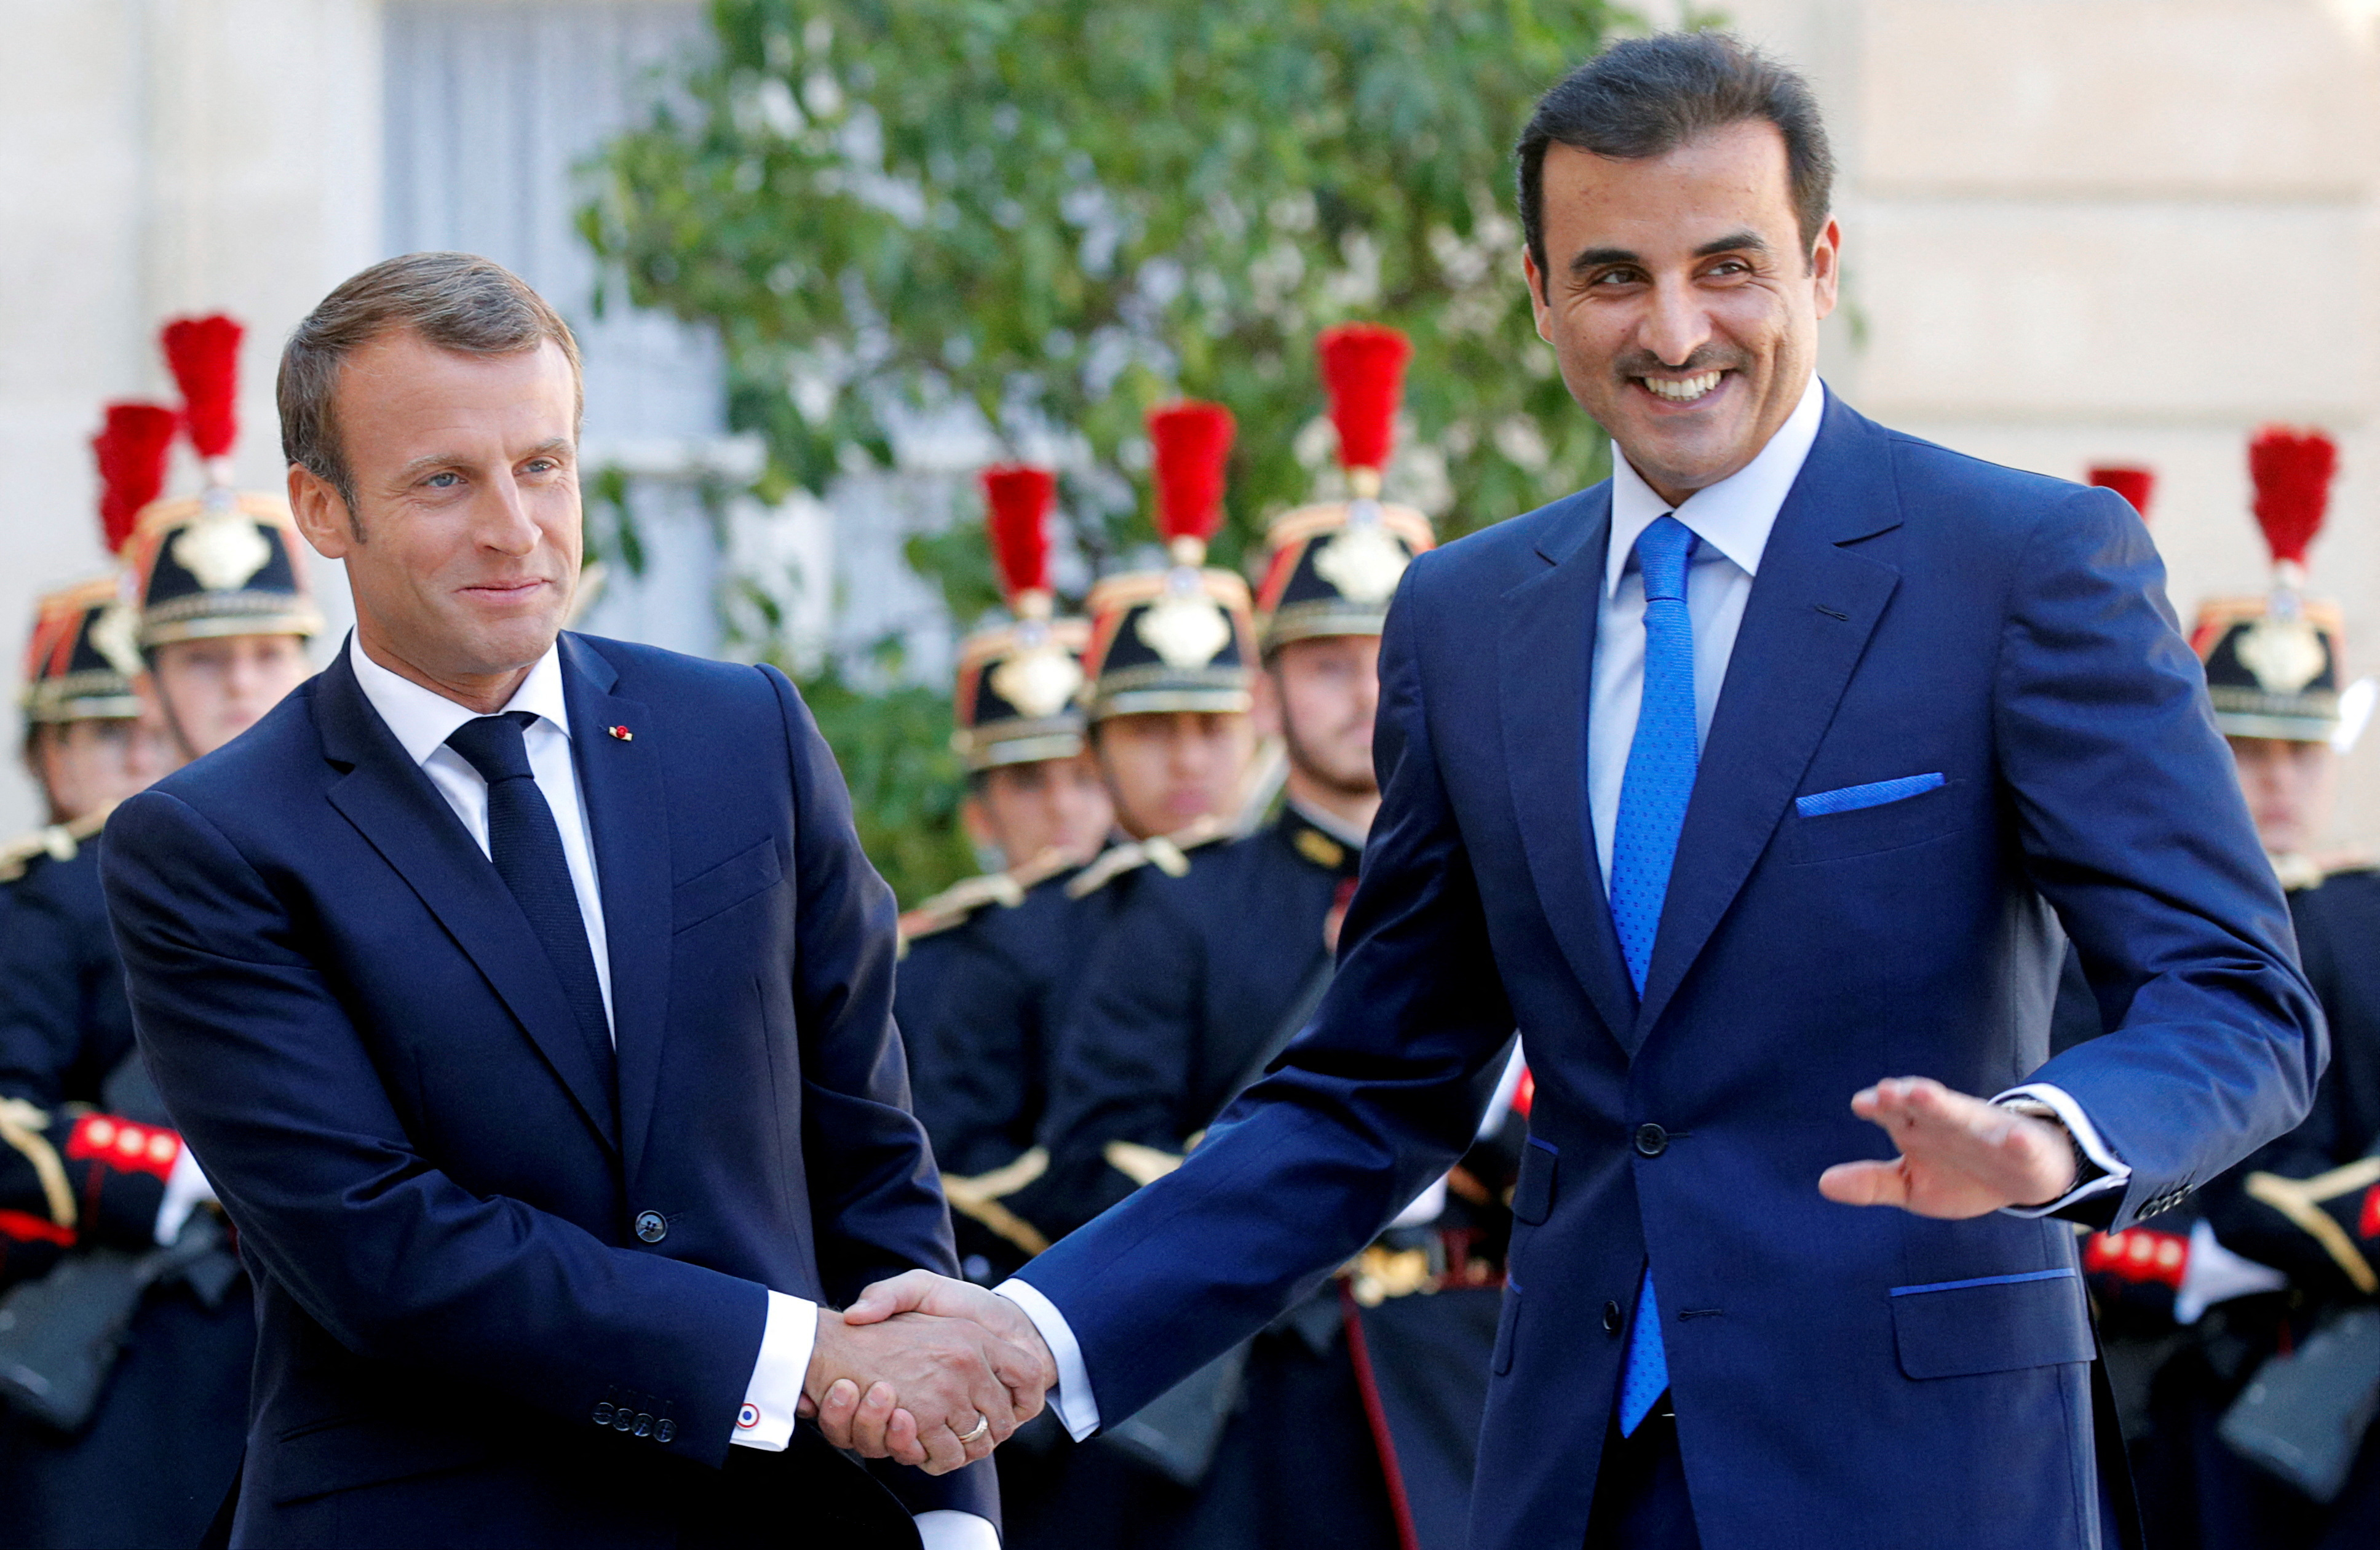 France's Macron says Qatar must move towards ‘tangible changes’